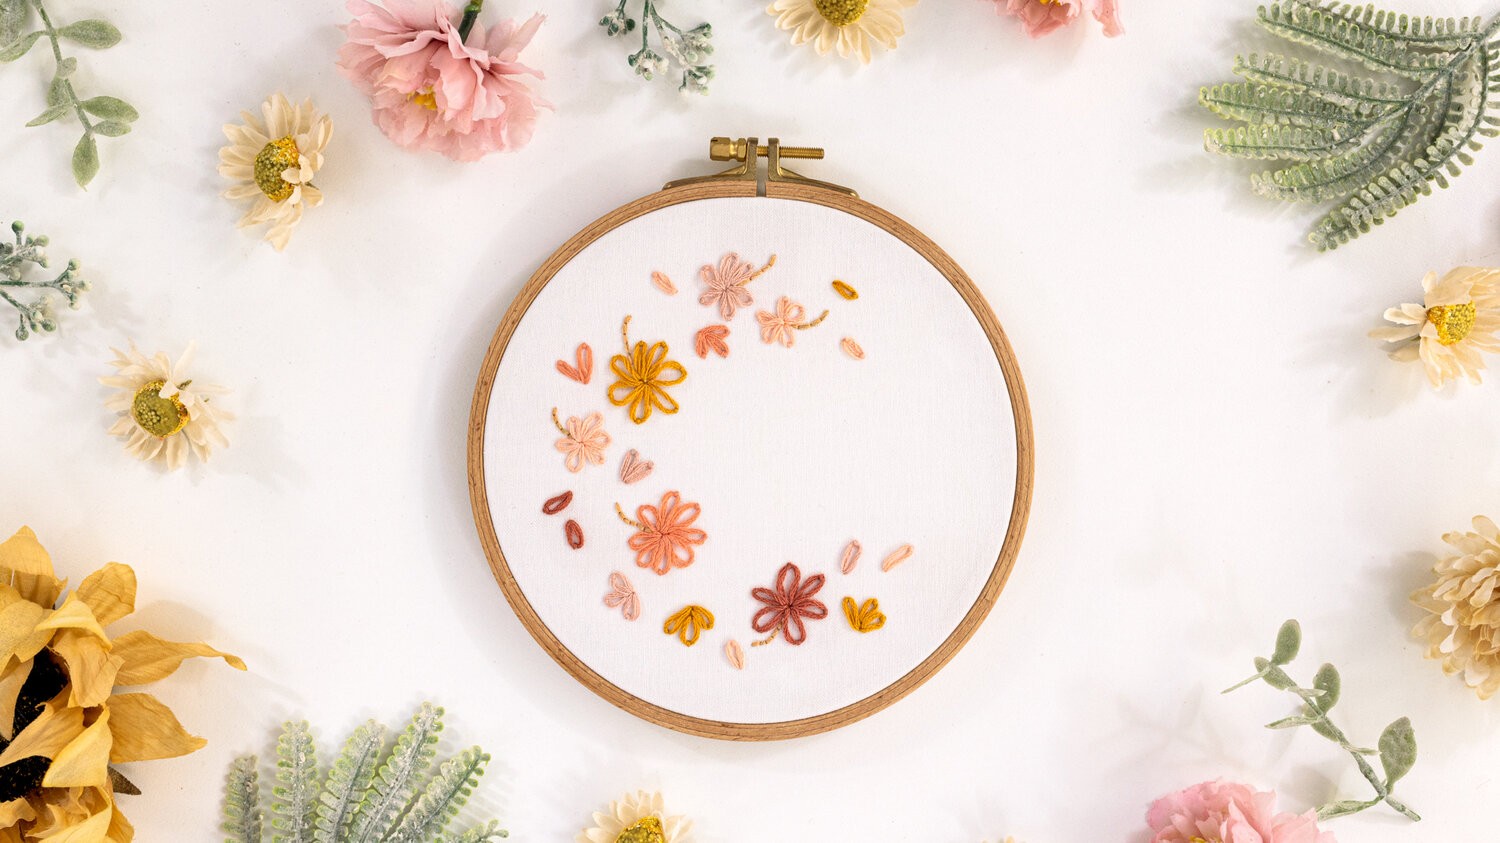 This images shows the Free embroidery pattern - Petal Breeze, is placed surrounded by flowers.